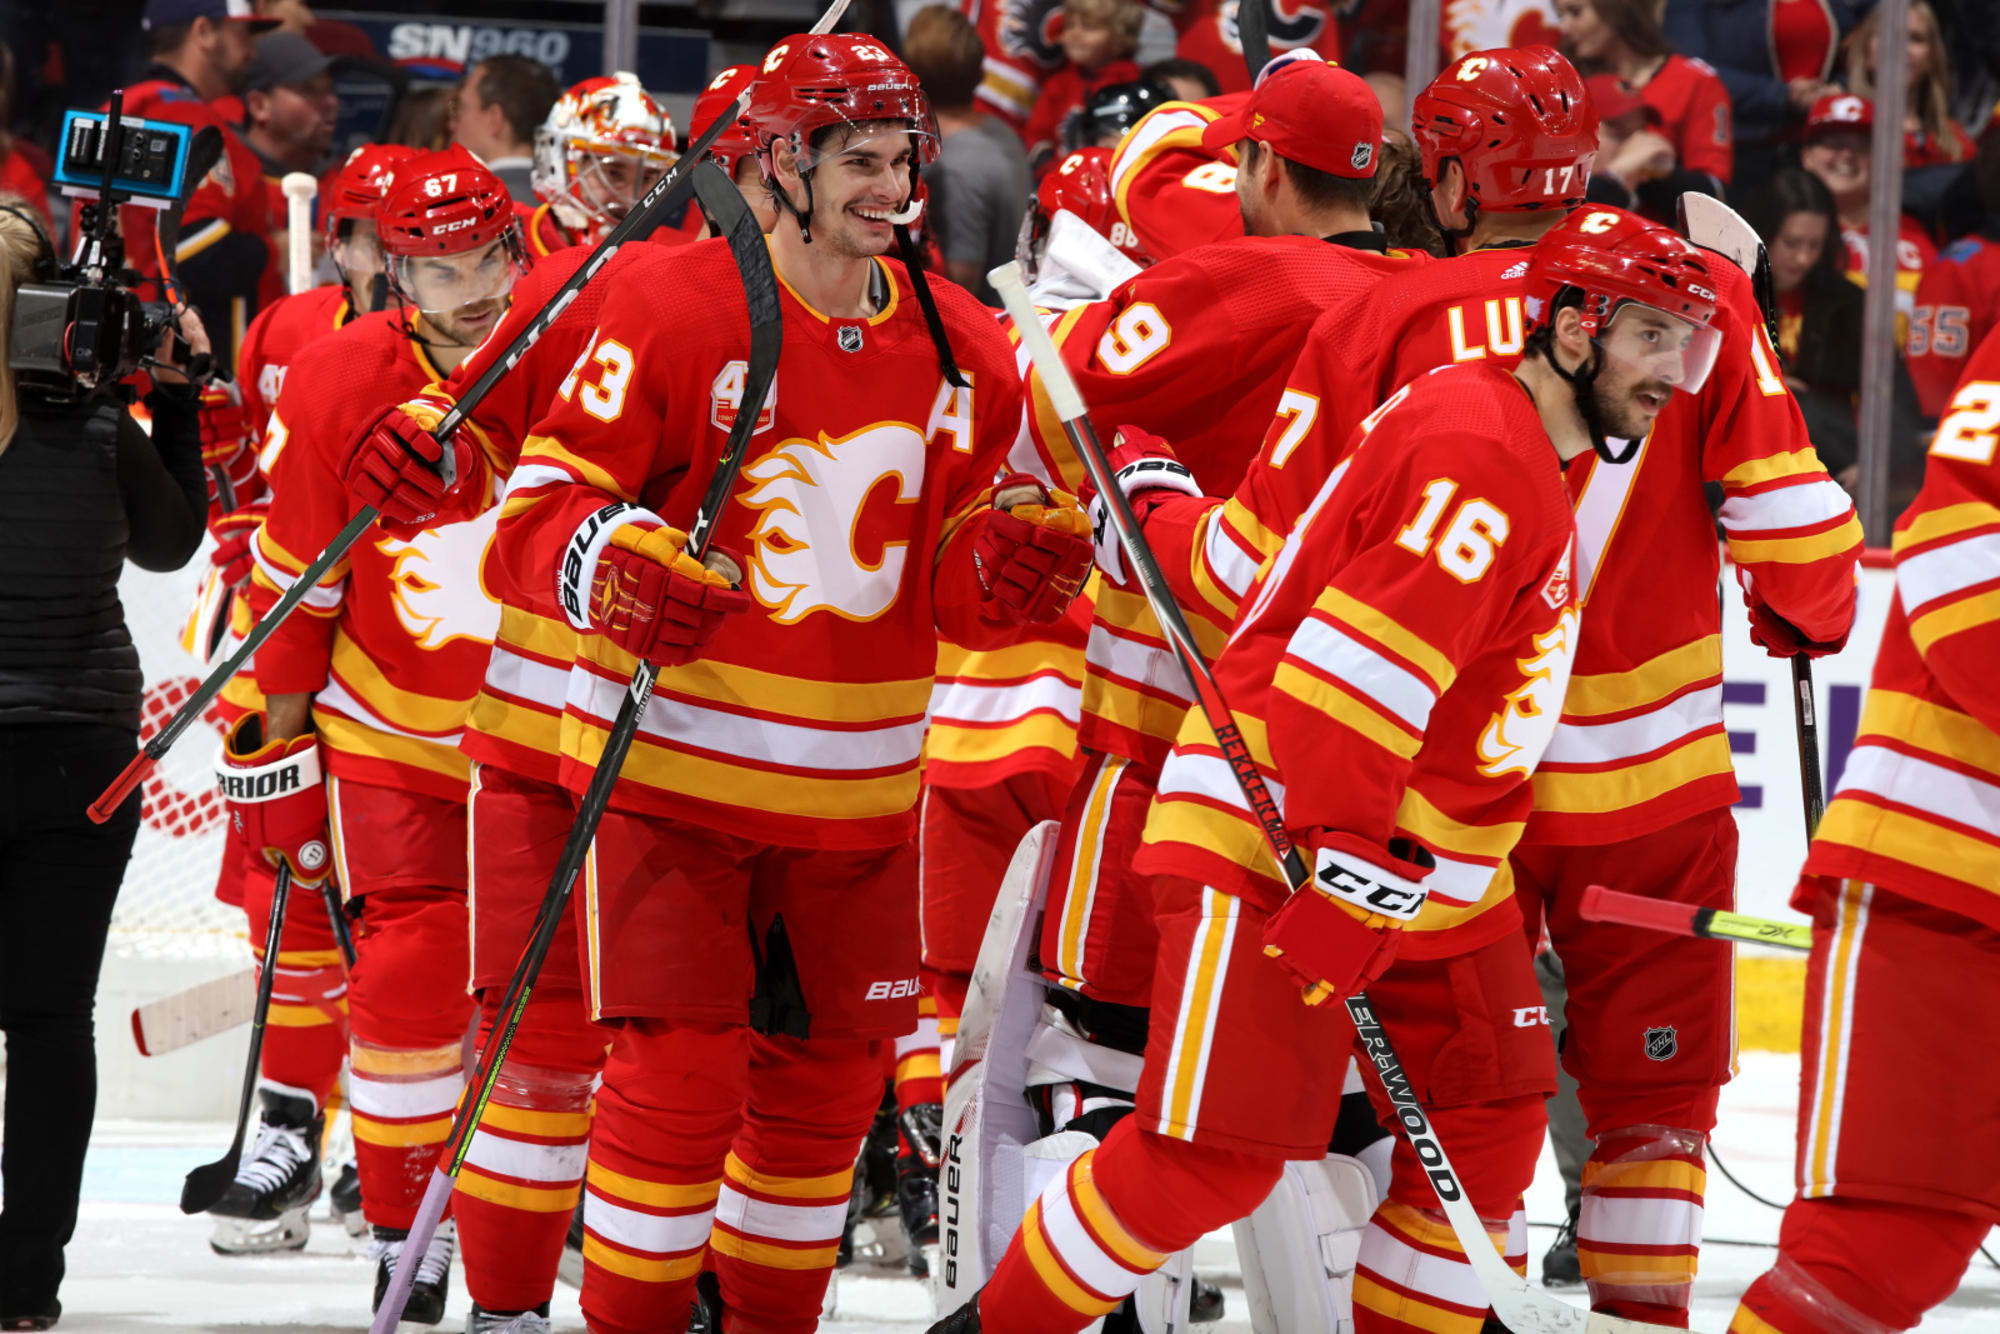 Stanley Cup Playoffs: Calgary Flames vs. Winnipeg Jets series preview